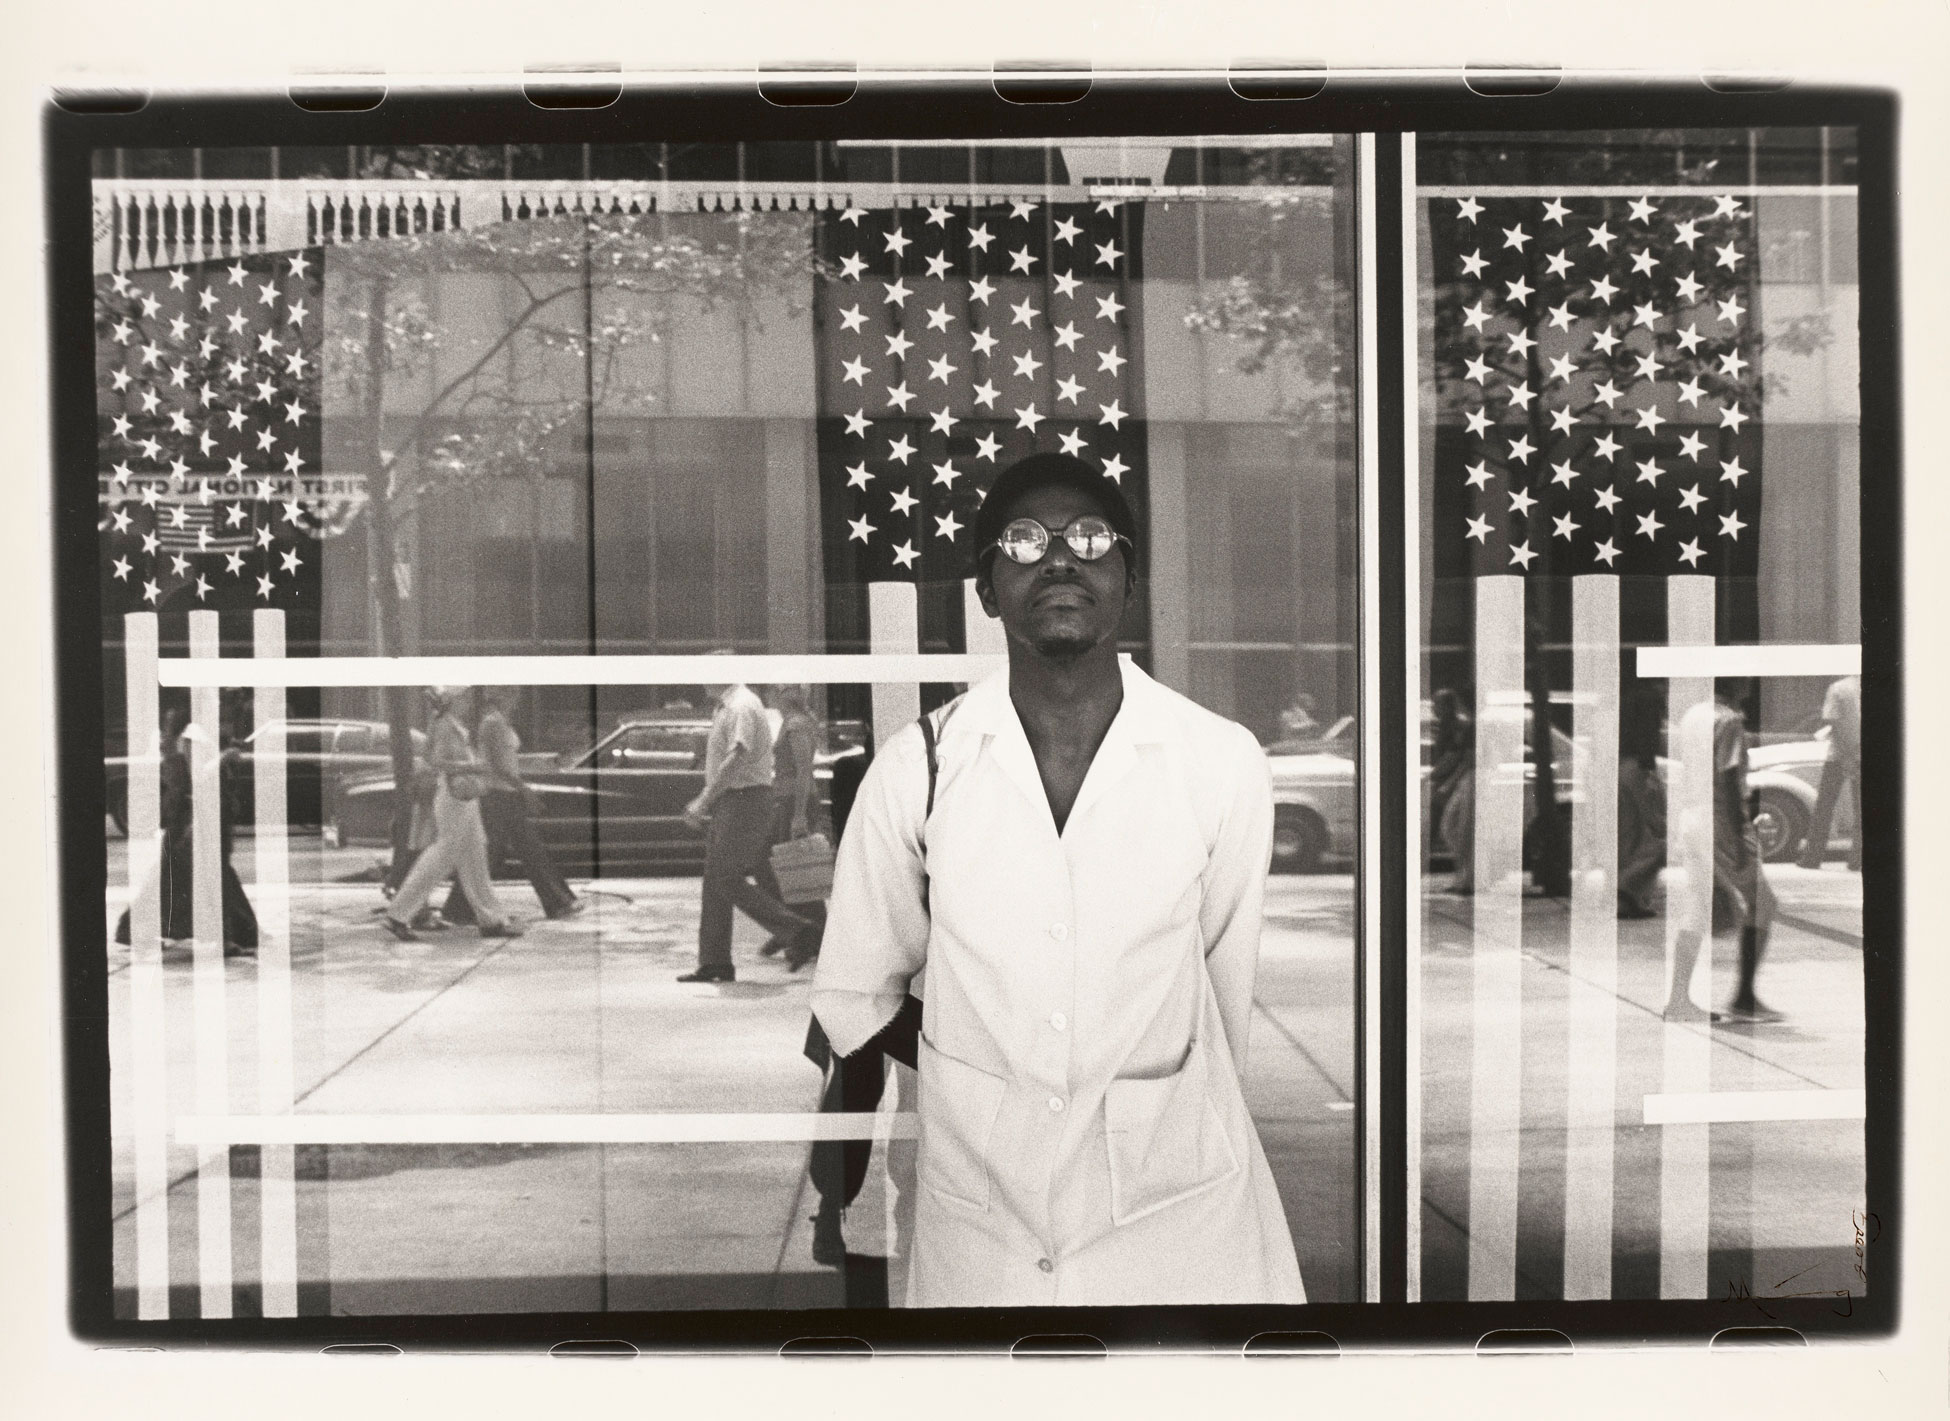 Ming Smith, America seen through Stars and Stripes, New York City, New York, printed ca. 1976.  Virginia Museum of Fine Arts, Adolph D. and Wilkins C. Williams Fund, 2016.241. © Ming Smith